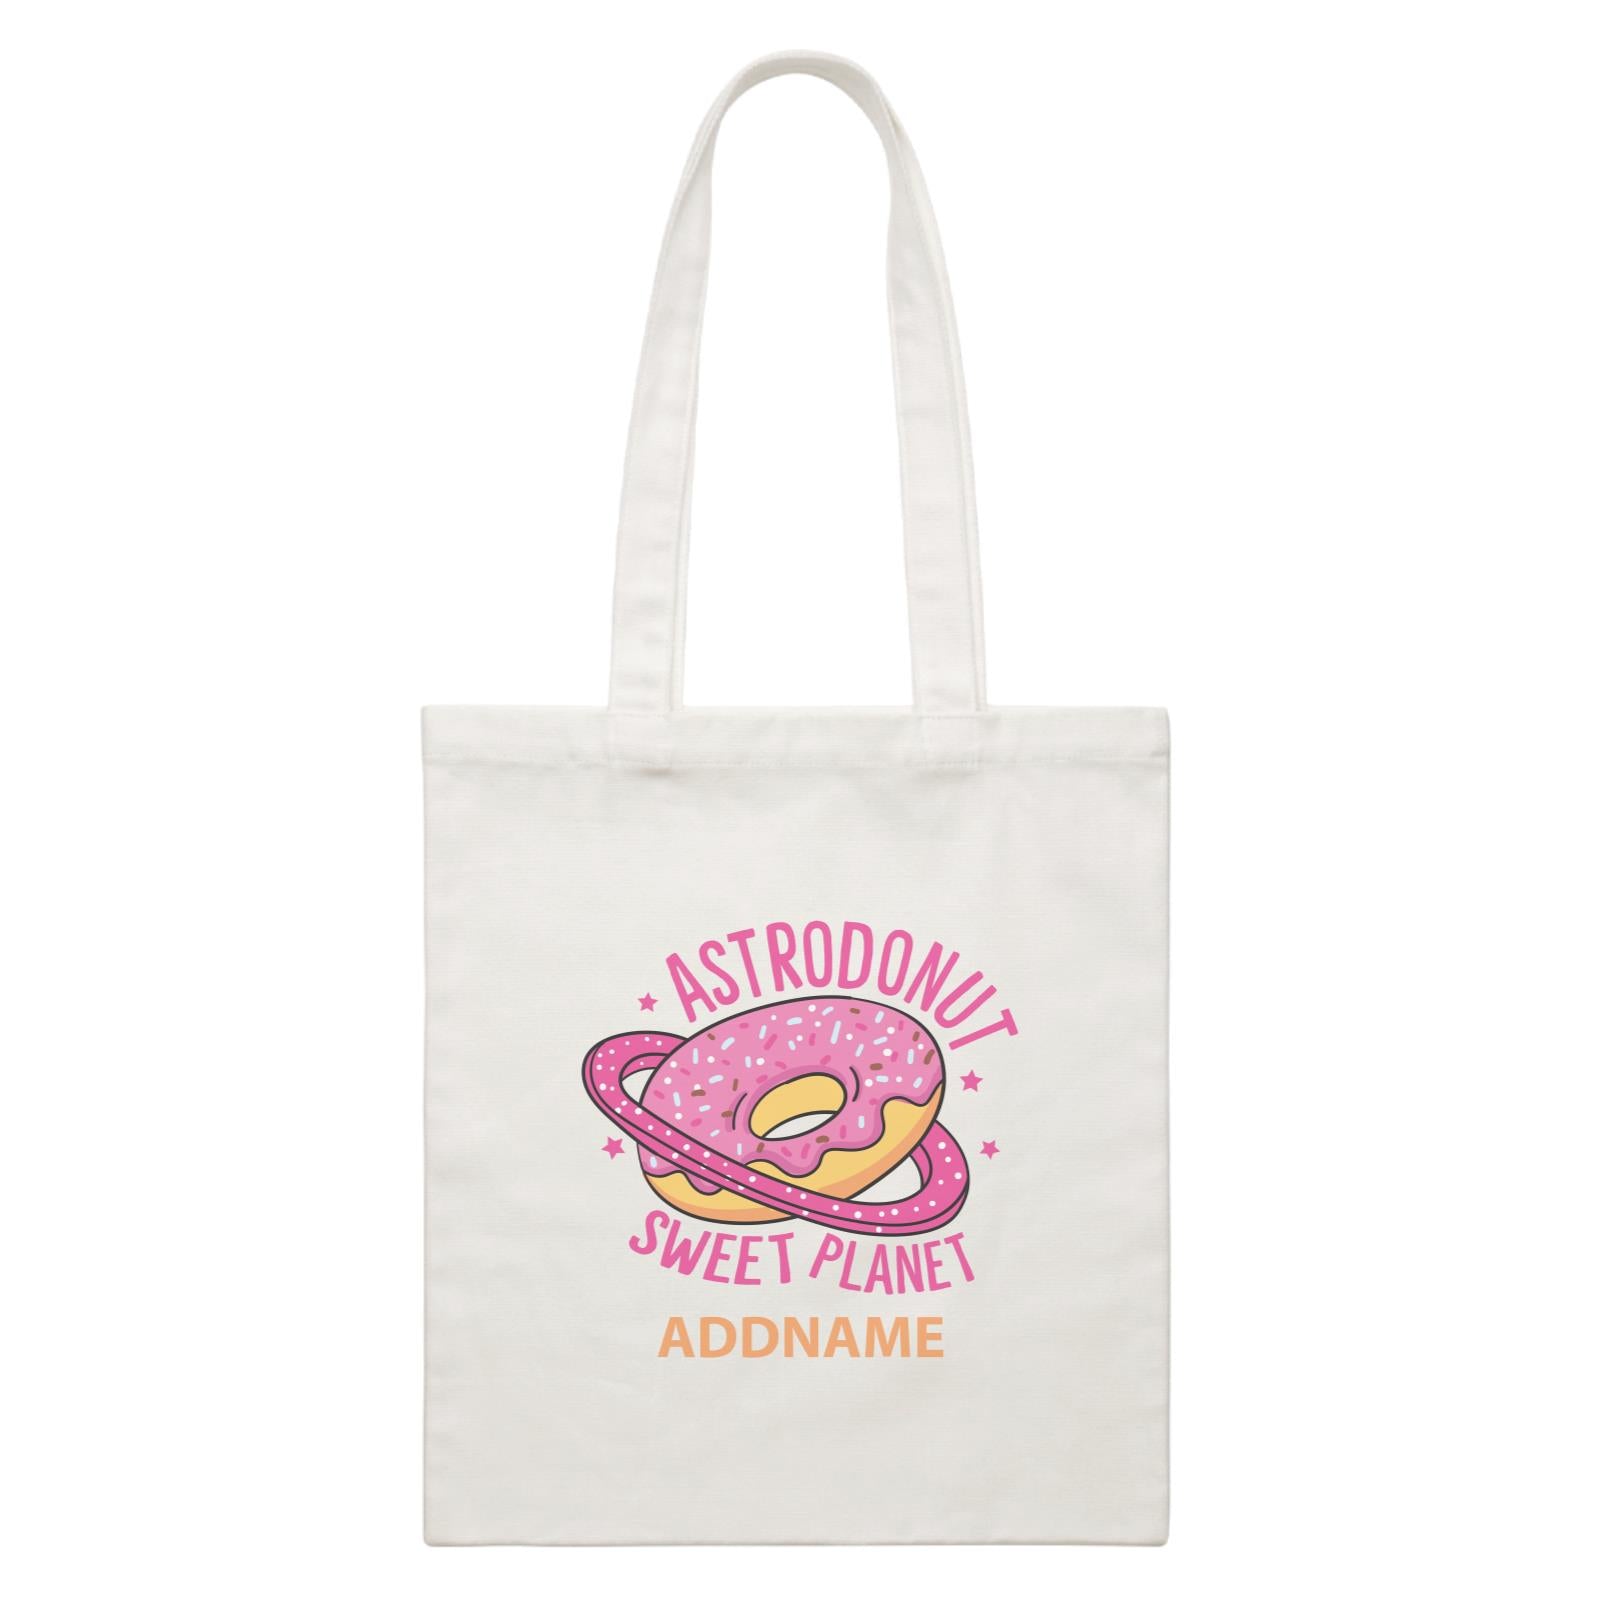 Cool Cute Foods Astrodonut Sweet Planet Addname White Canvas Bag